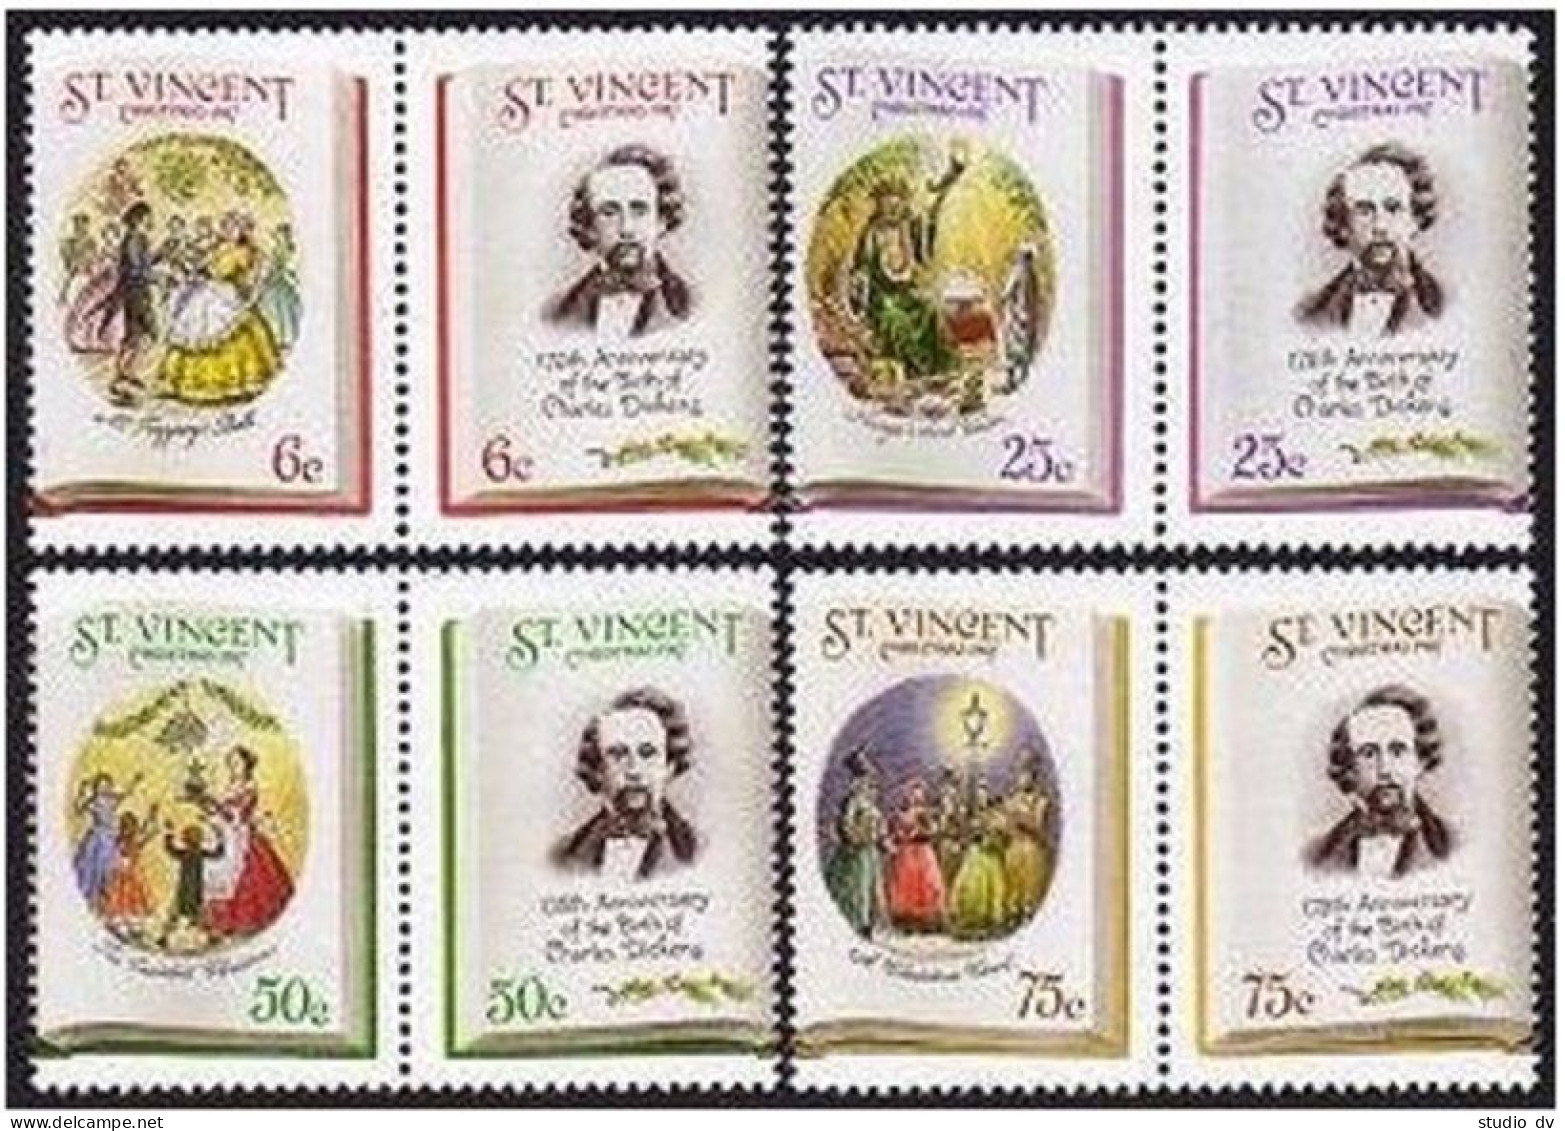 St Vincent 1061-1064 B-a Order In Pair, 1065, MNH. Charles Dickens-175, 1987. - St.Vincent (1979-...)